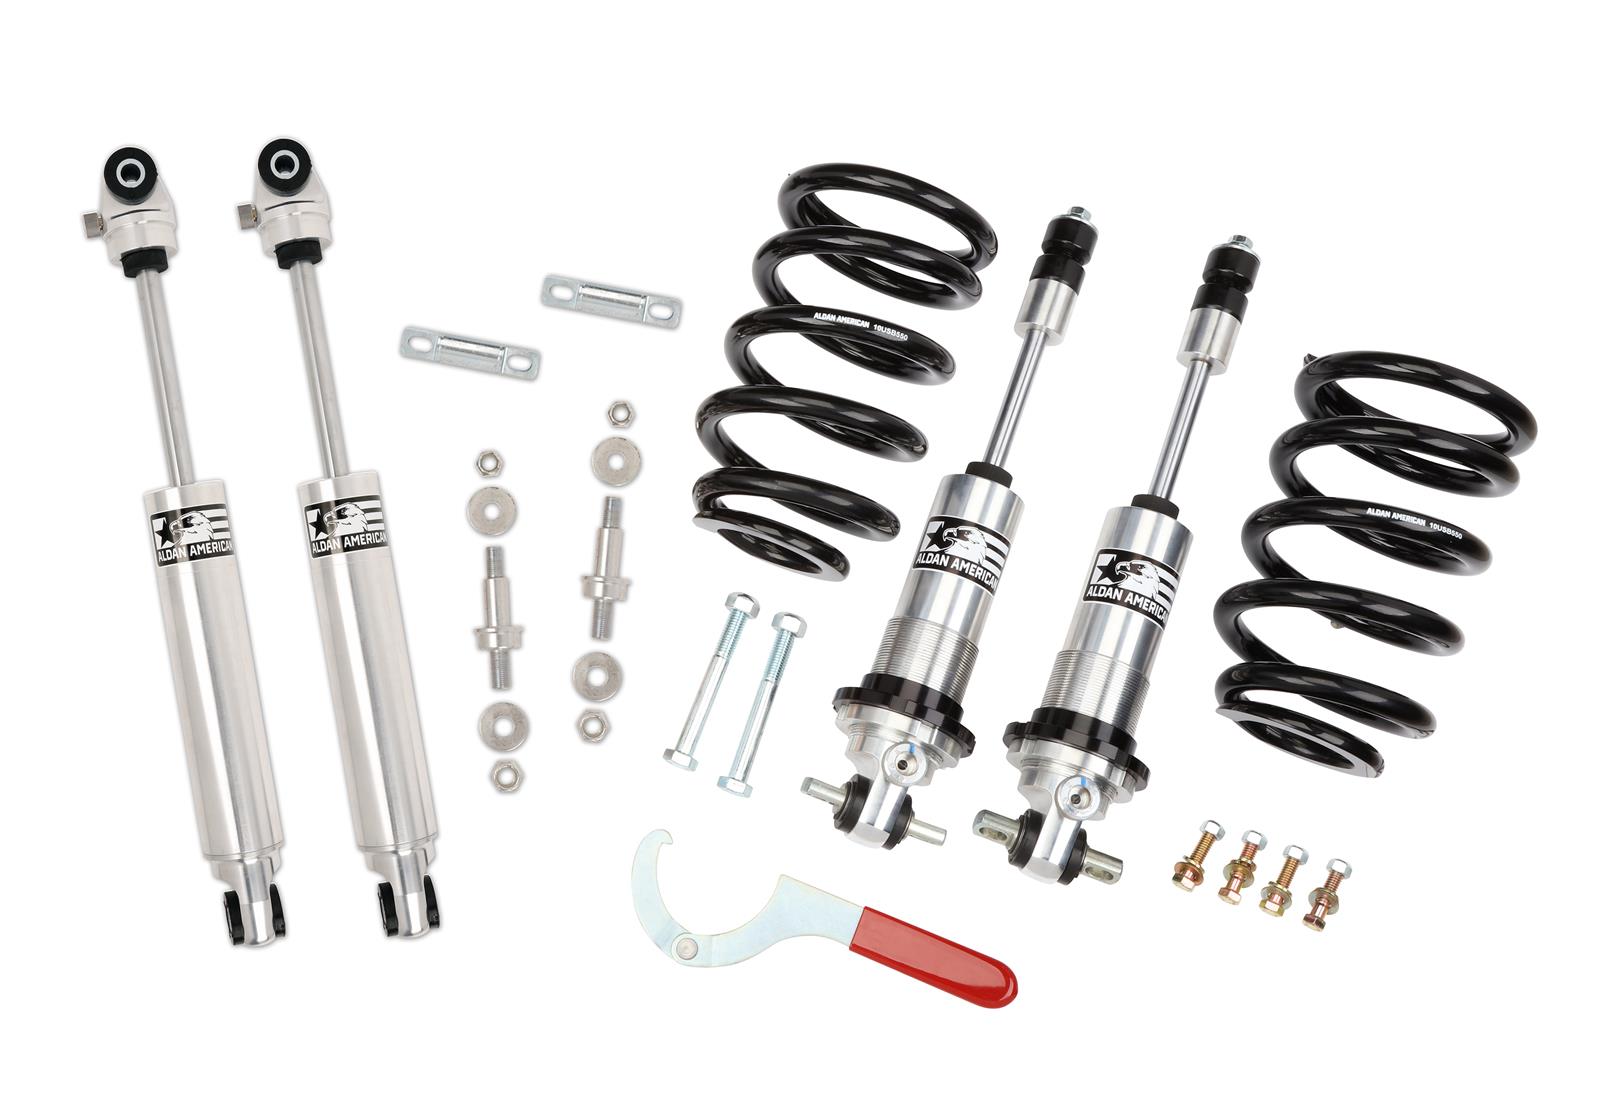 The Aldan American Road Comp Series Suspension kits are now available for 1967-81 Chevrolet Camaro and Pontiac Firebird models.